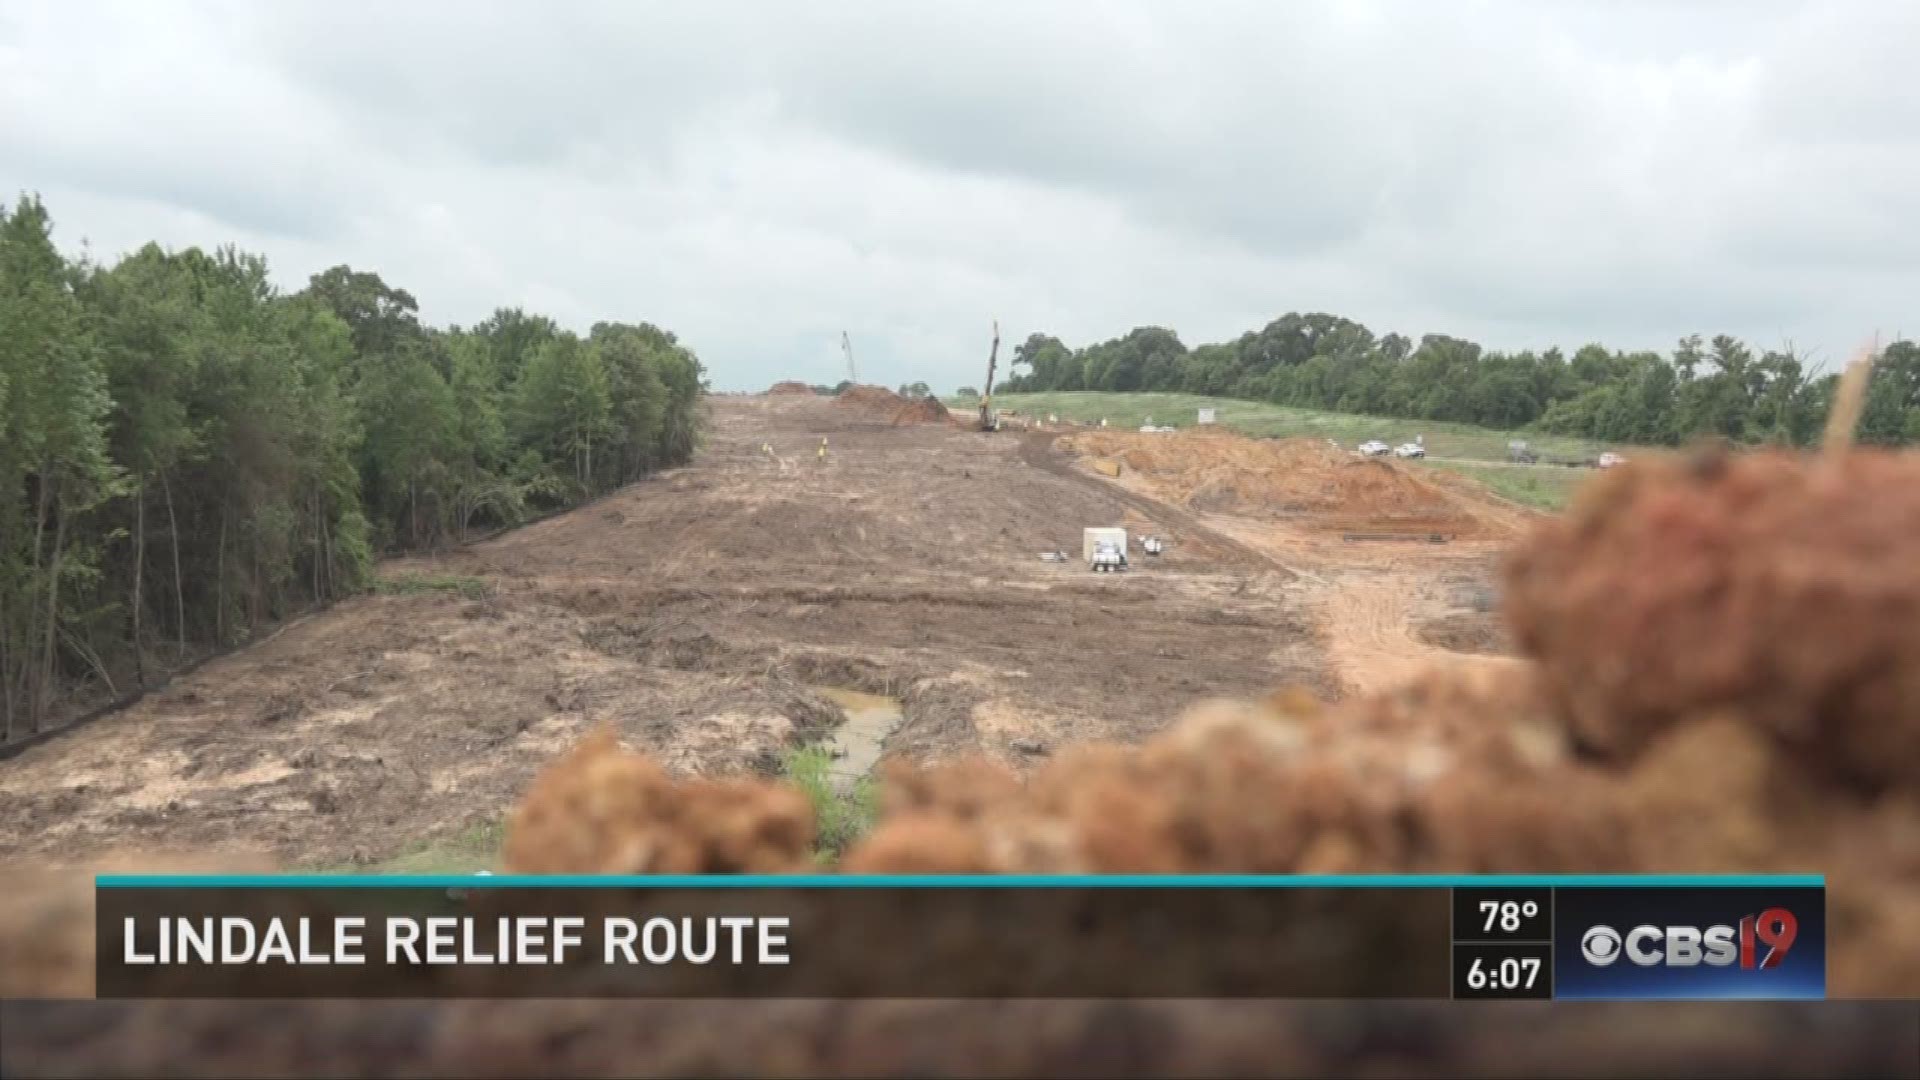 Work has begun on a new stretch of Toll 49 known as the "Lindale Relief Route" in order to relieve traffic congestion.